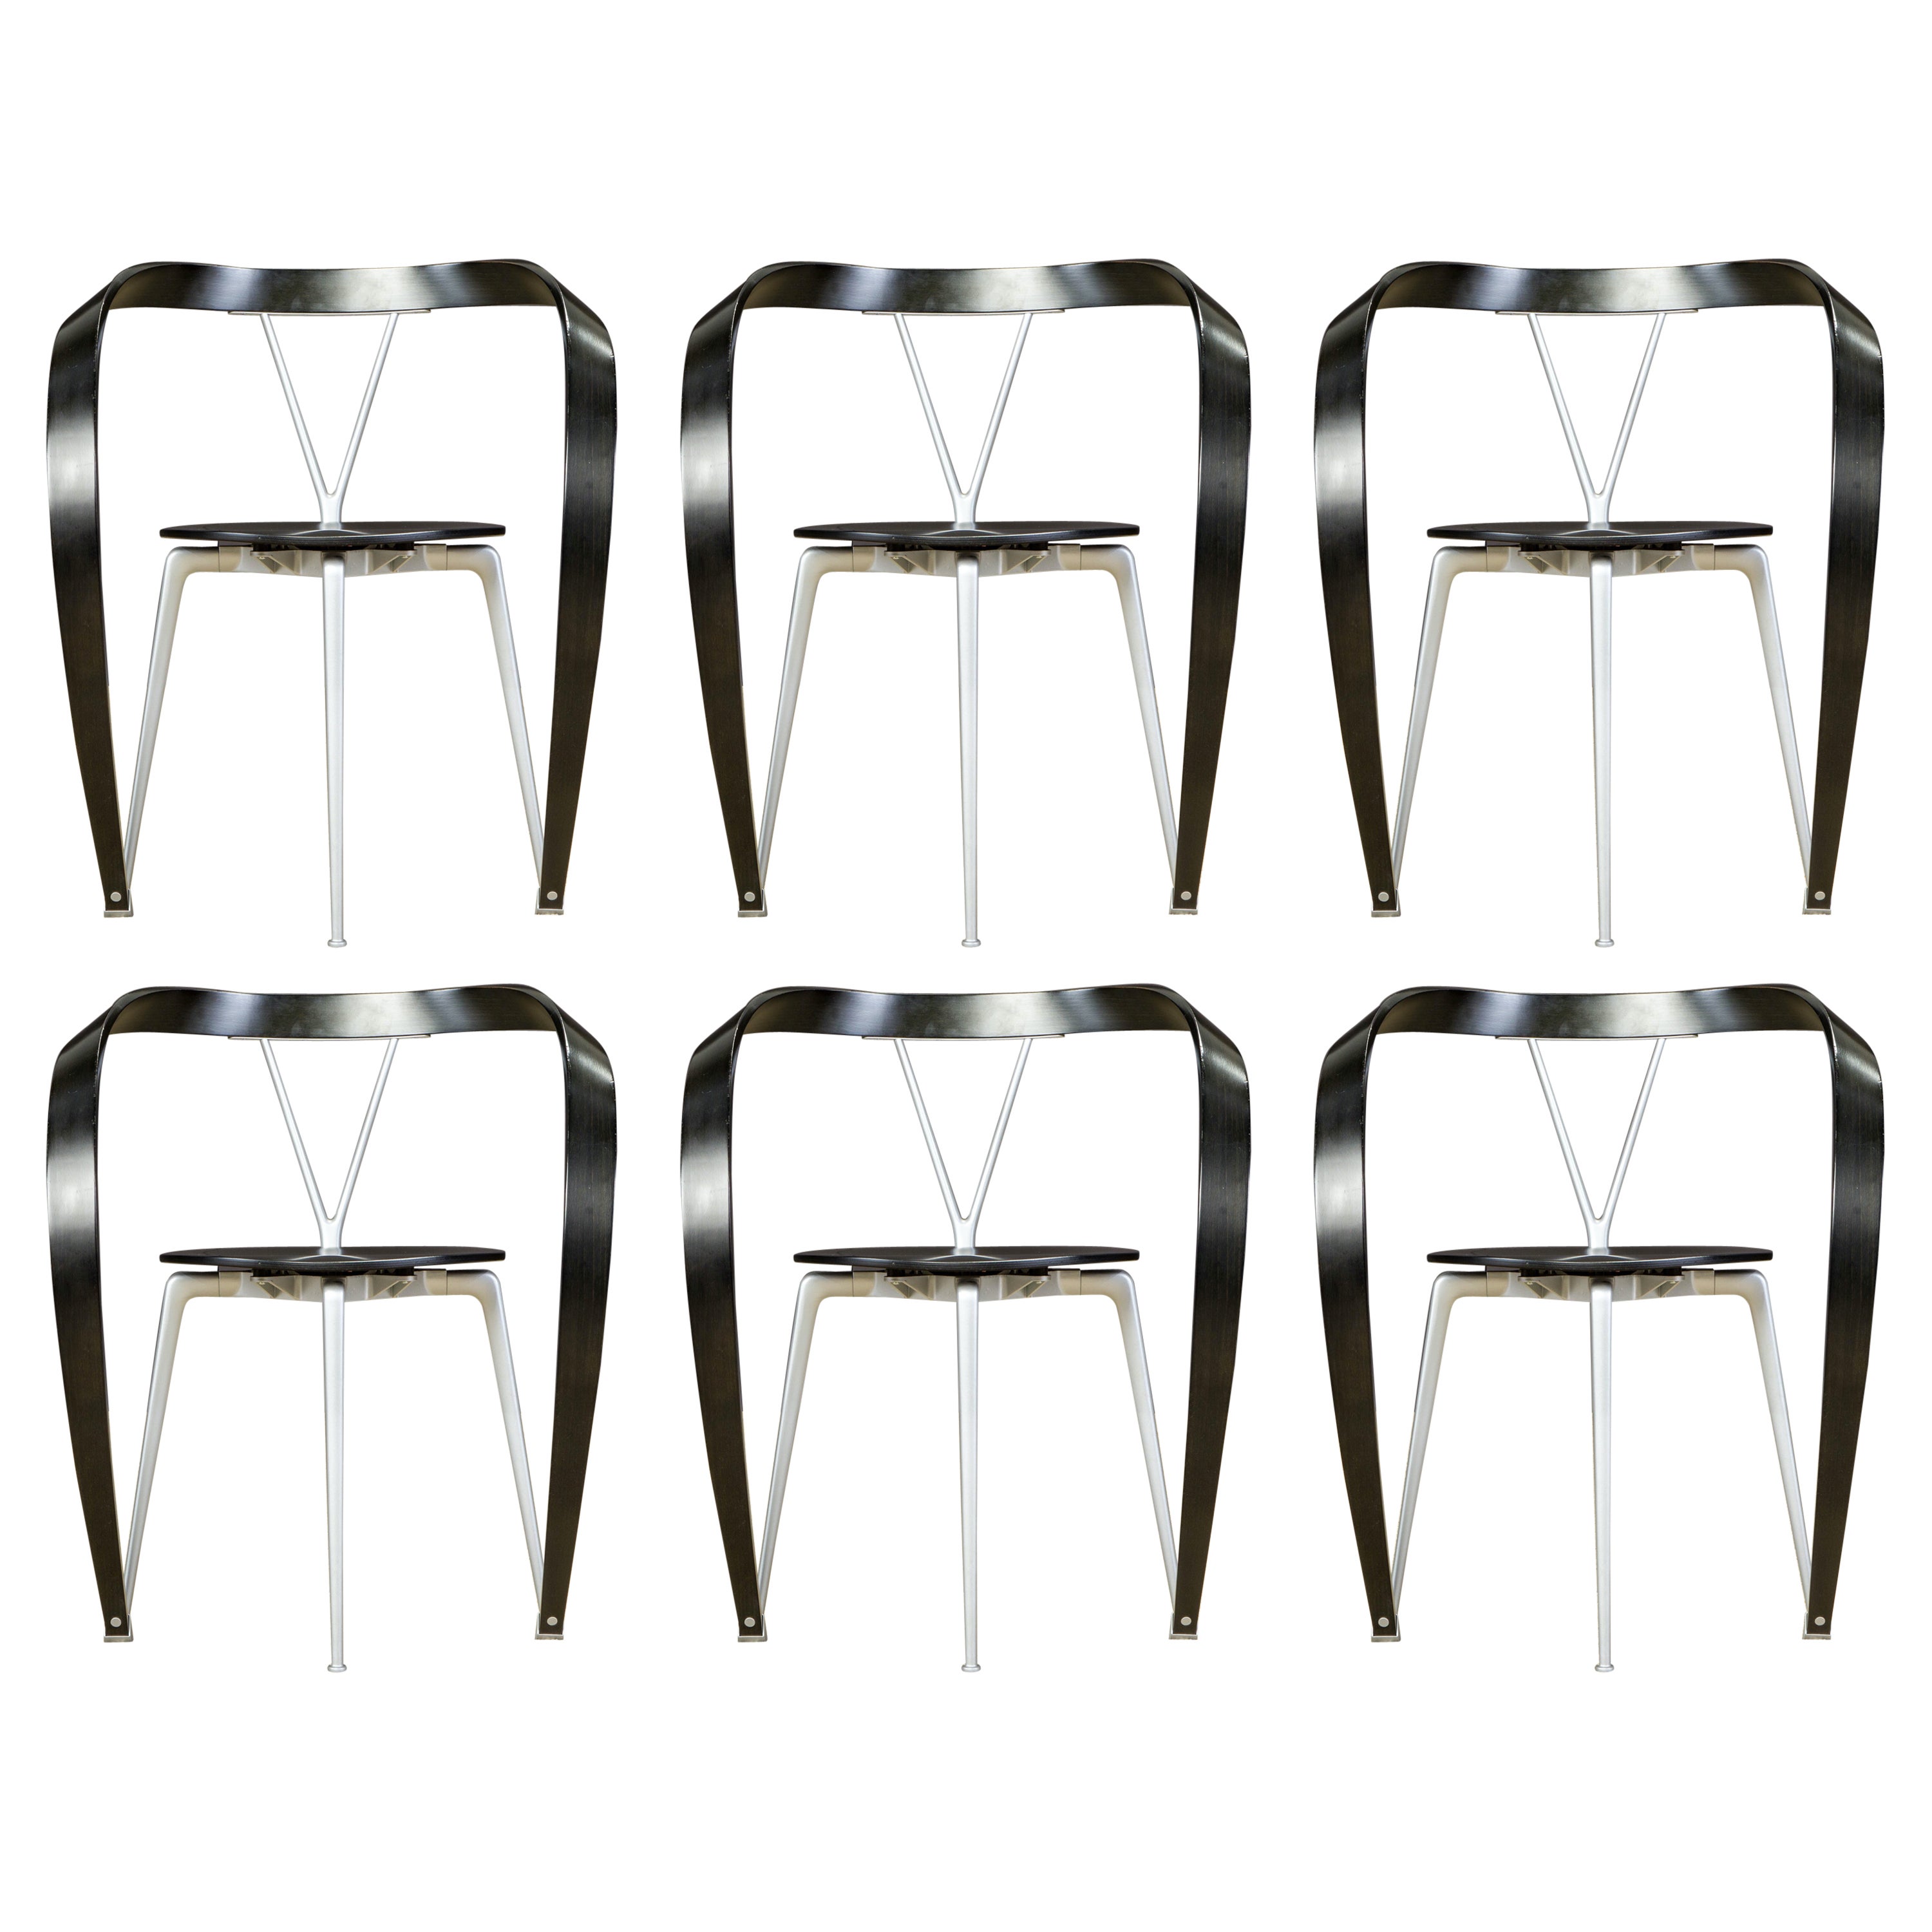 Andrea Branzi 'Revers' Post-Modern Chairs for Cassina, 1993, Set of Six, Signed For Sale